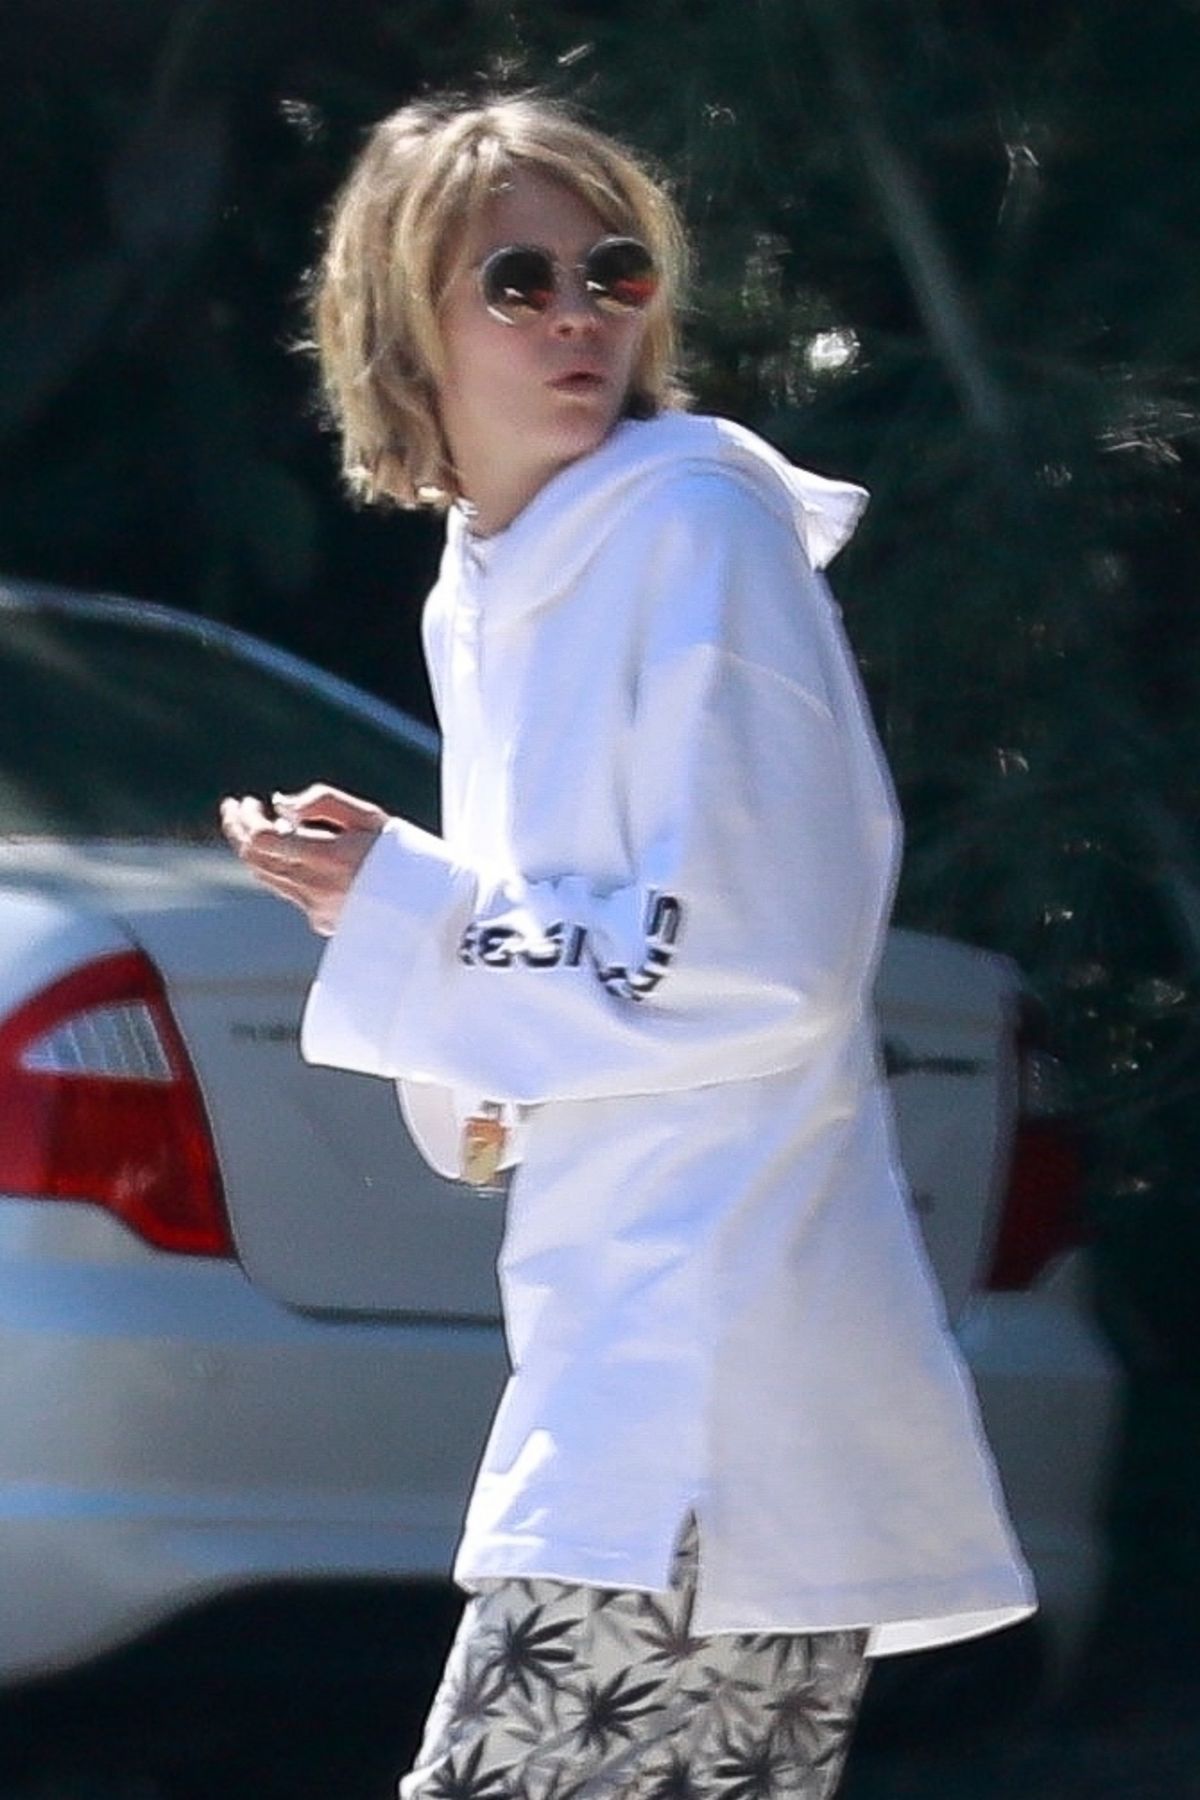 cara-delevingne-out-and-about-in-los-angeles-03-15-2019-5.jpg